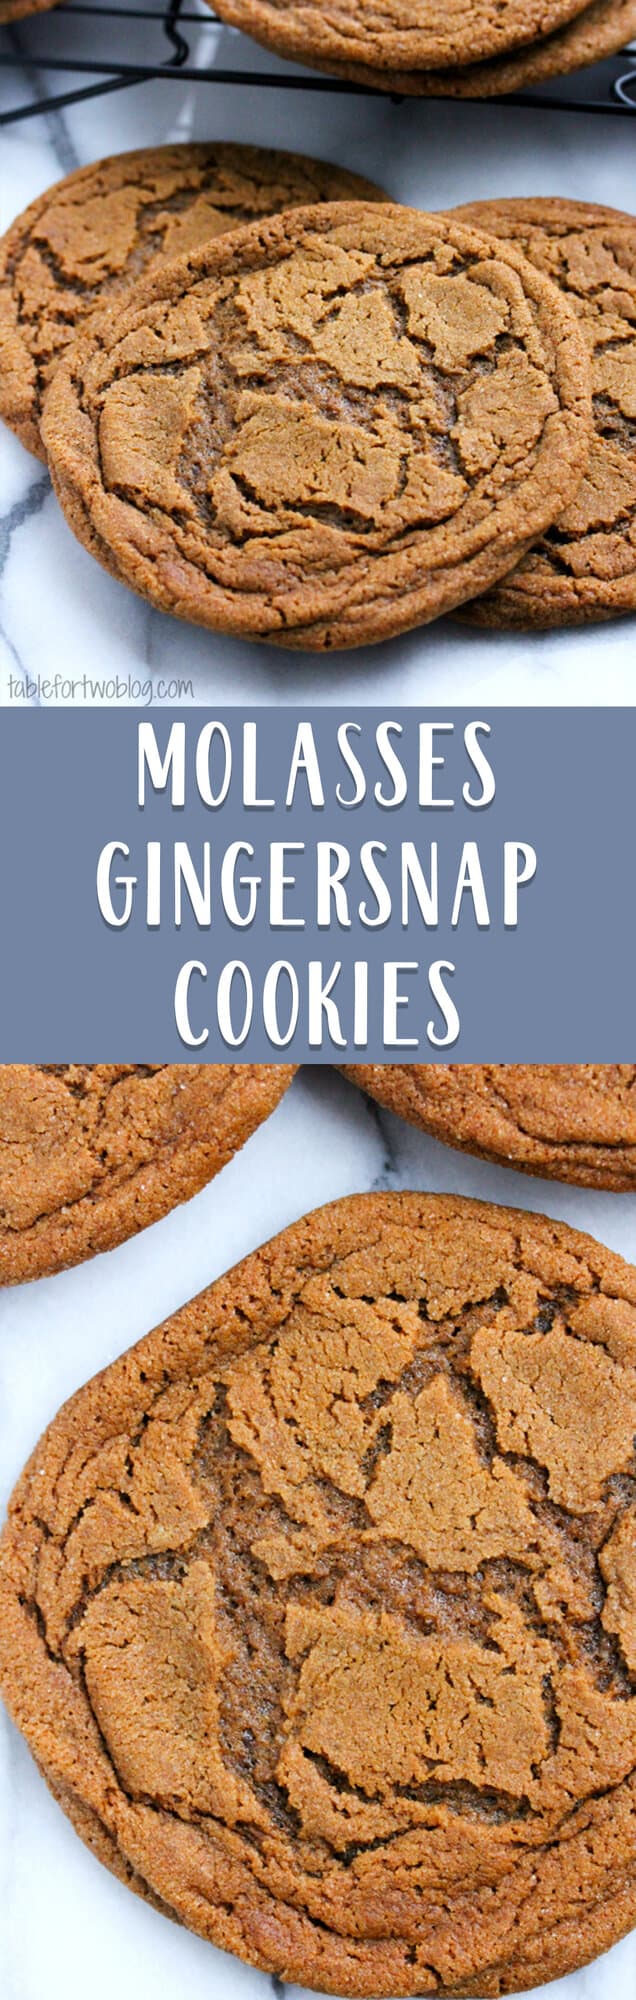 Molasses ginger cookies are soft and chewy with the perfect amount of ginger flavor